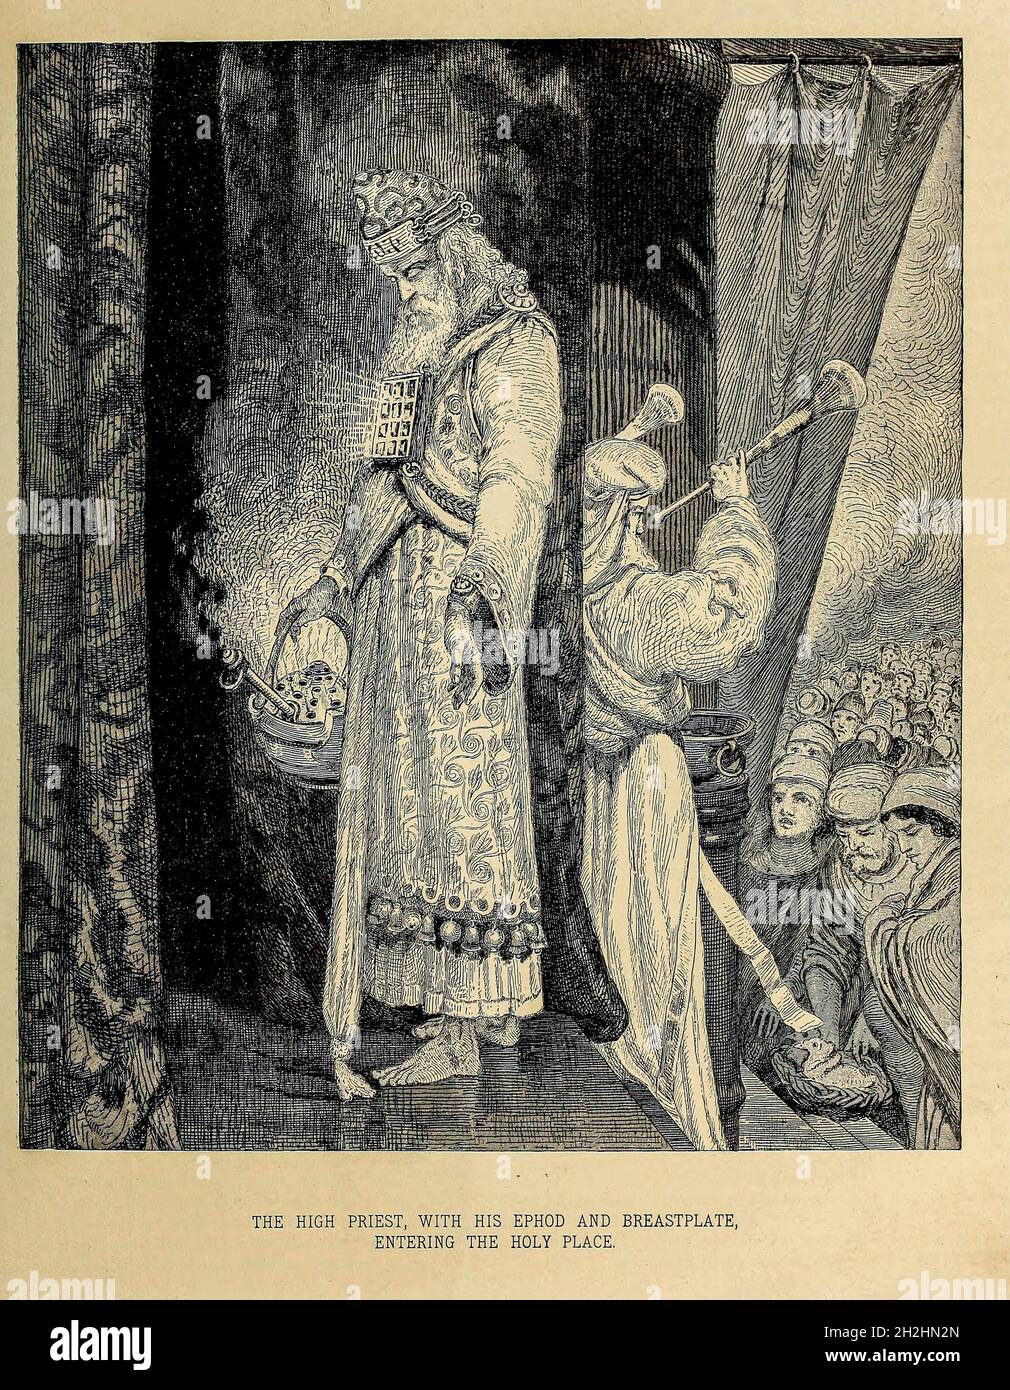 The High Priest, with his Ephod and Breastplate, Entering the Holy Place from ' The Doré family Bible ' containing the Old and New Testaments, The Apocrypha Embellished with Fine Full-Page Engravings, Illustrations and the Dore Bible Gallery. Published in Philadelphia by William T. Amies in 1883 Stock Photo